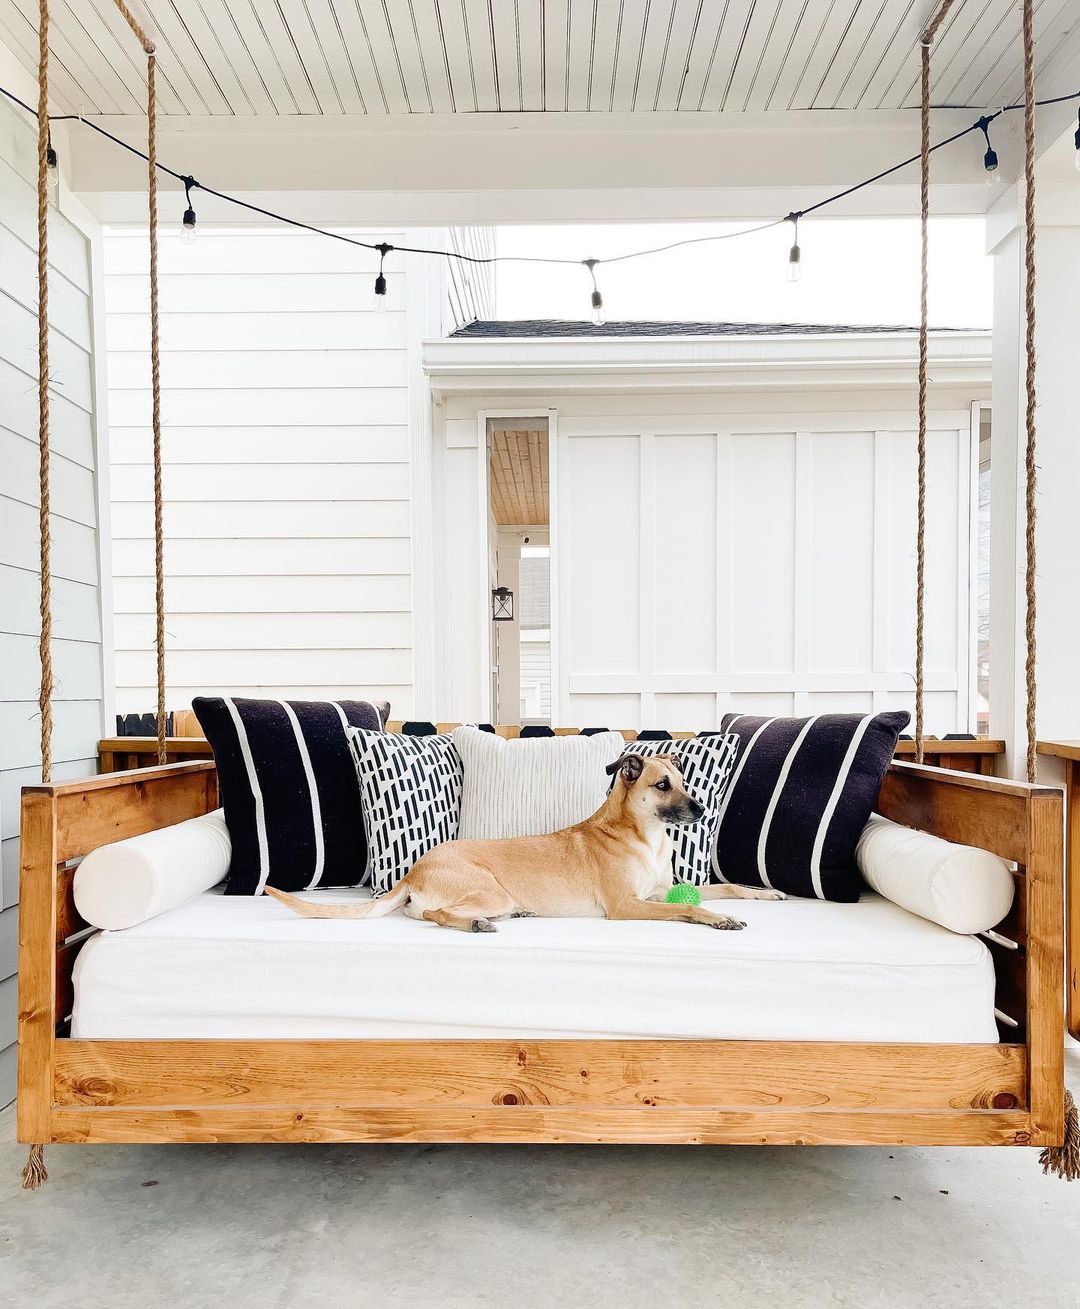 Dog Laying on a Hanging Daybed. Photo by Instagram user @hugheshomediy